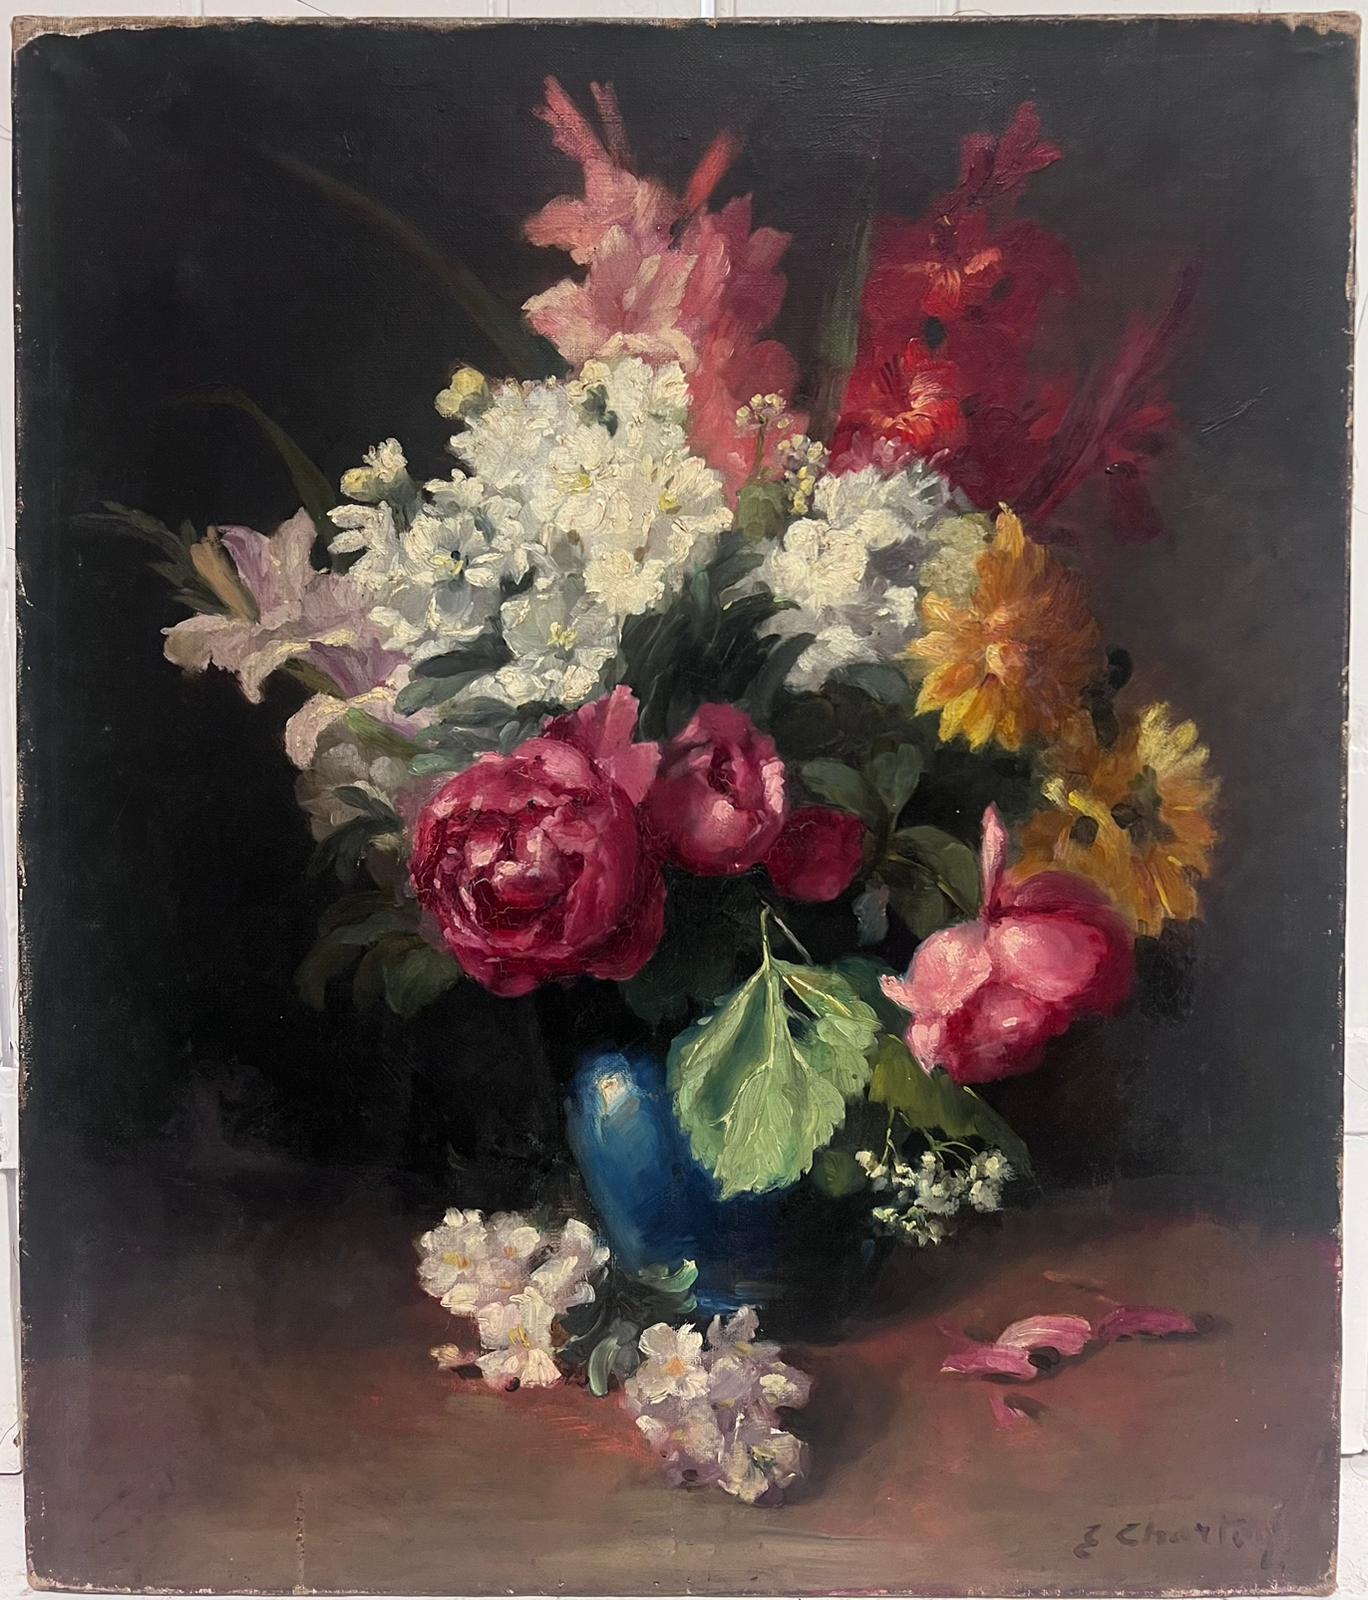 Classical Still Life of Flowers in a Vase
French School, circa 1900
signed oil on canvas, unframed
canvas: 22 x 18 inches
provenance: private collection, France
condition: very good and sound condition